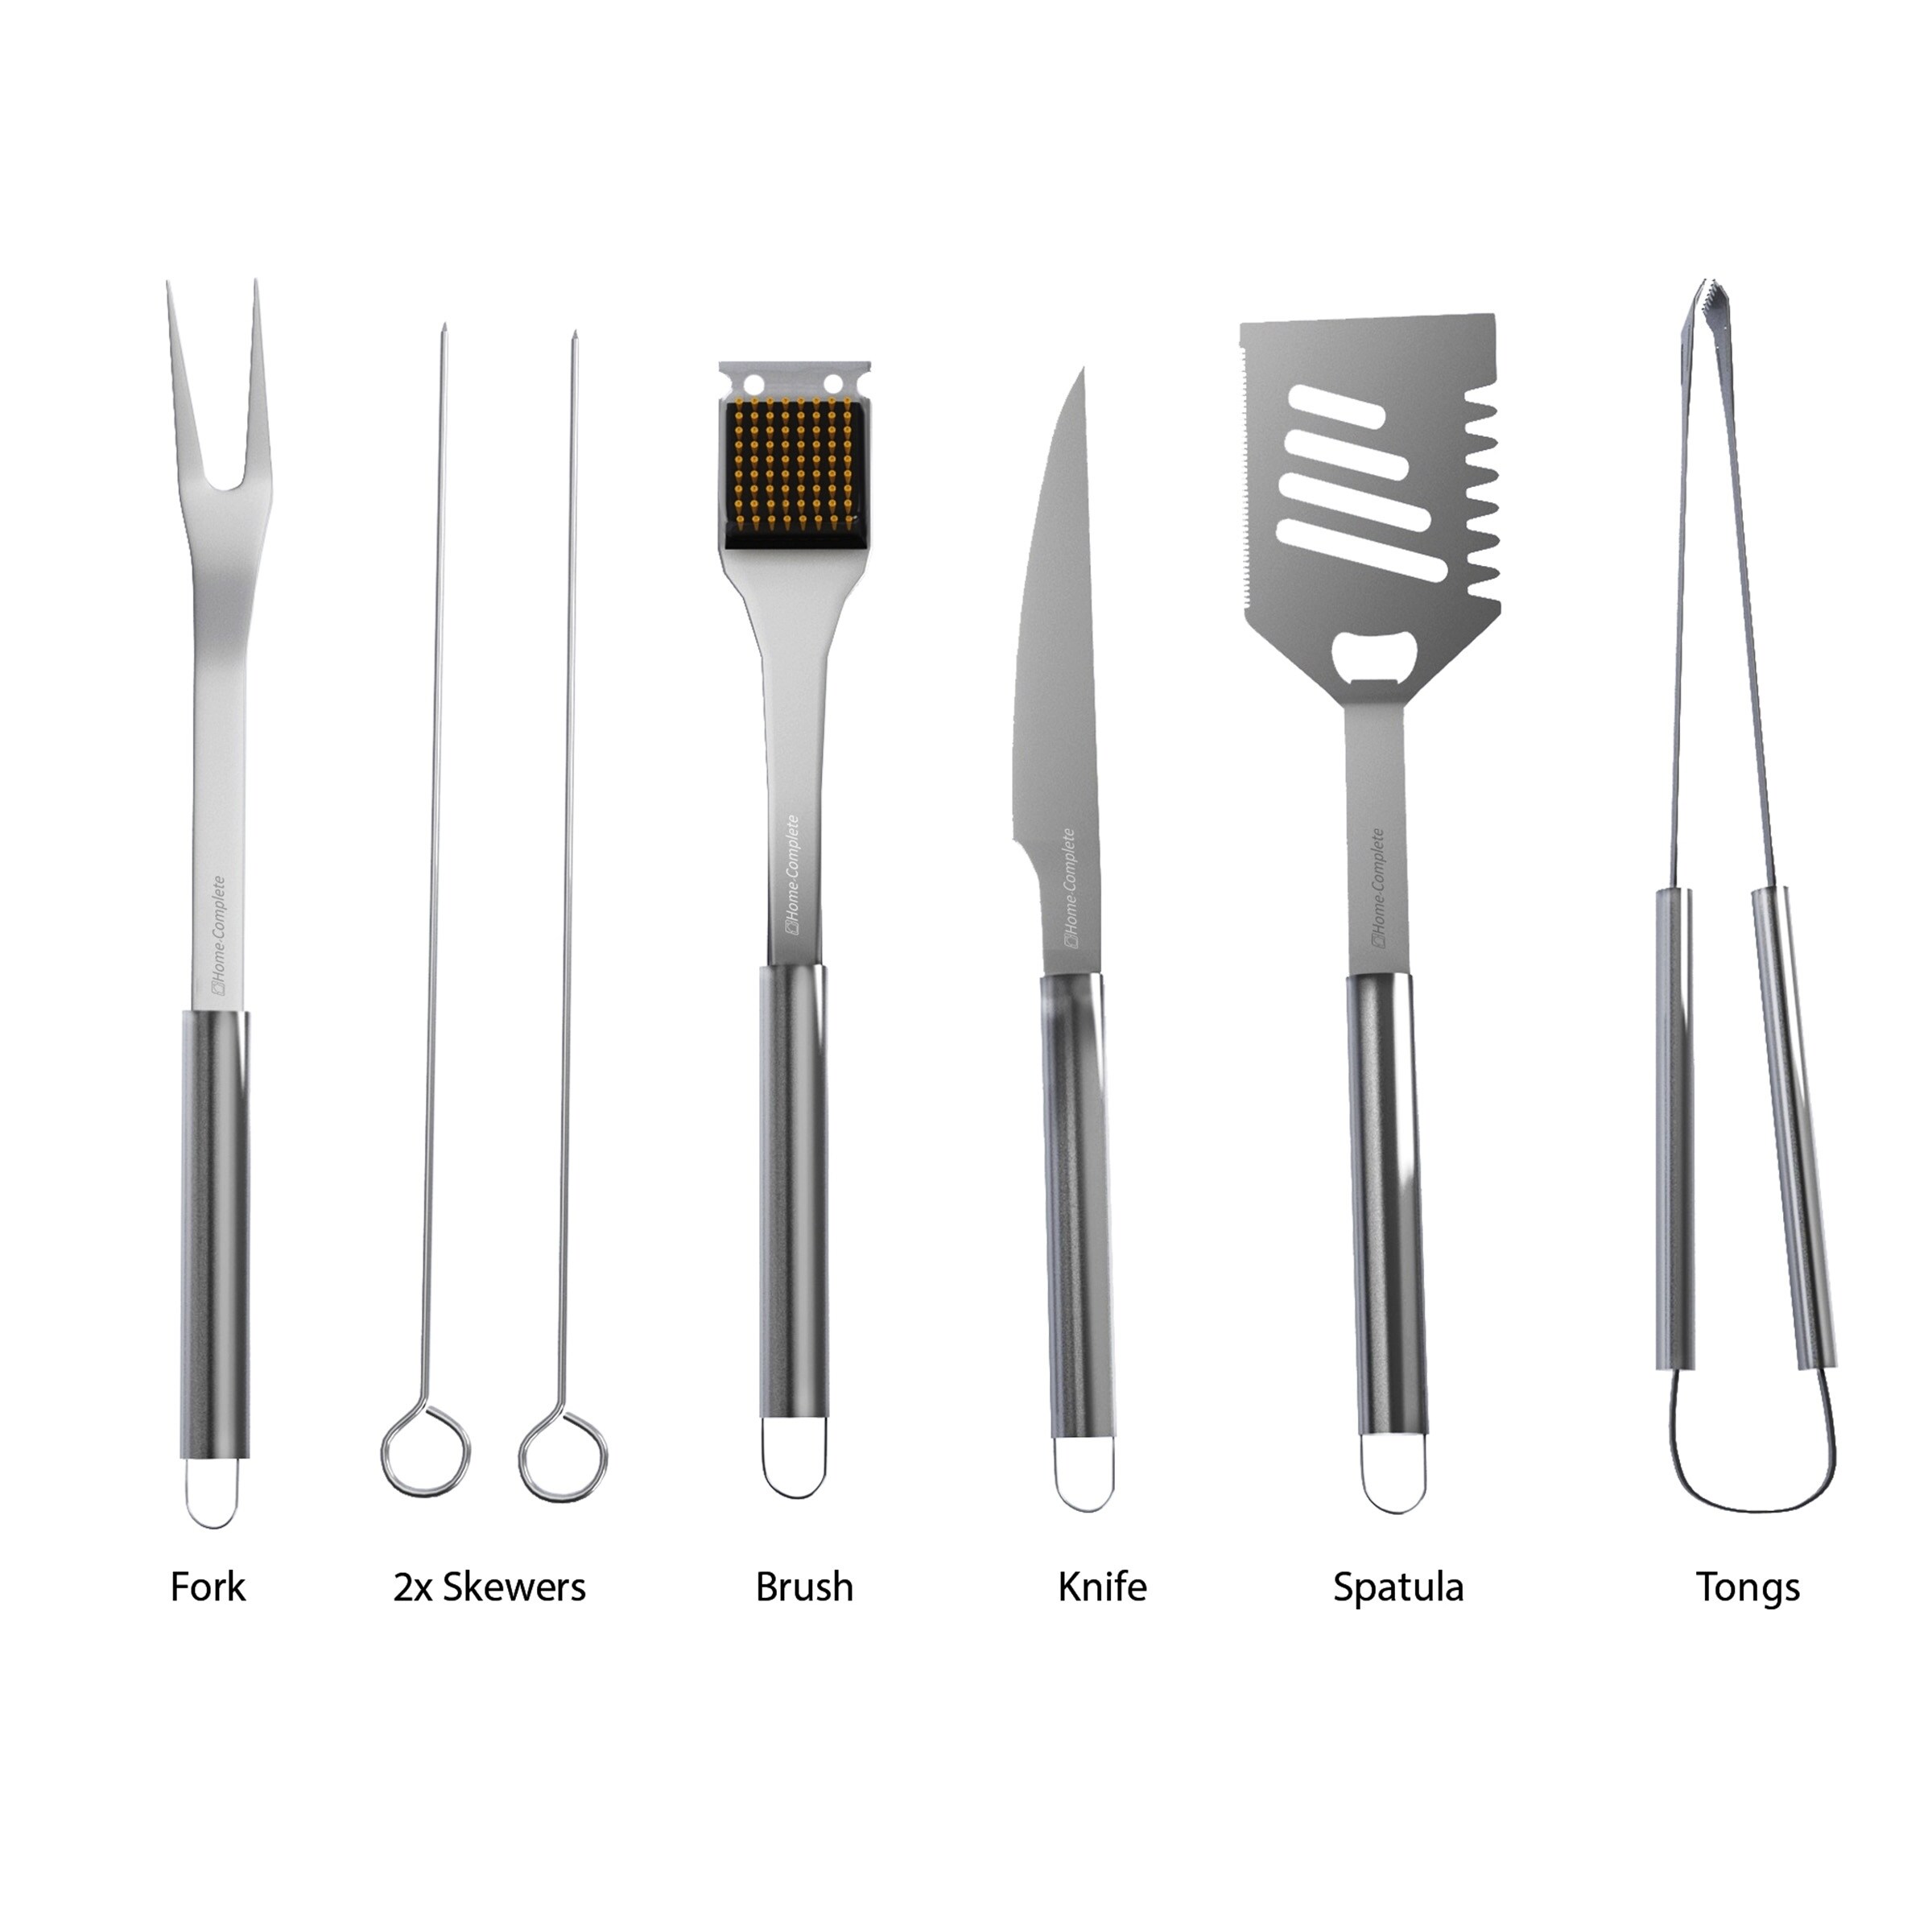 https://ak1.ostkcdn.com/images/products/22541497/Stainless-Steel-Barbecue-Grilling-Accessories-with-7-Utensils-and-Carrying-Case-Home-Complete-ff66eae2-1200-4e66-9d0d-bb449600bce9.jpg